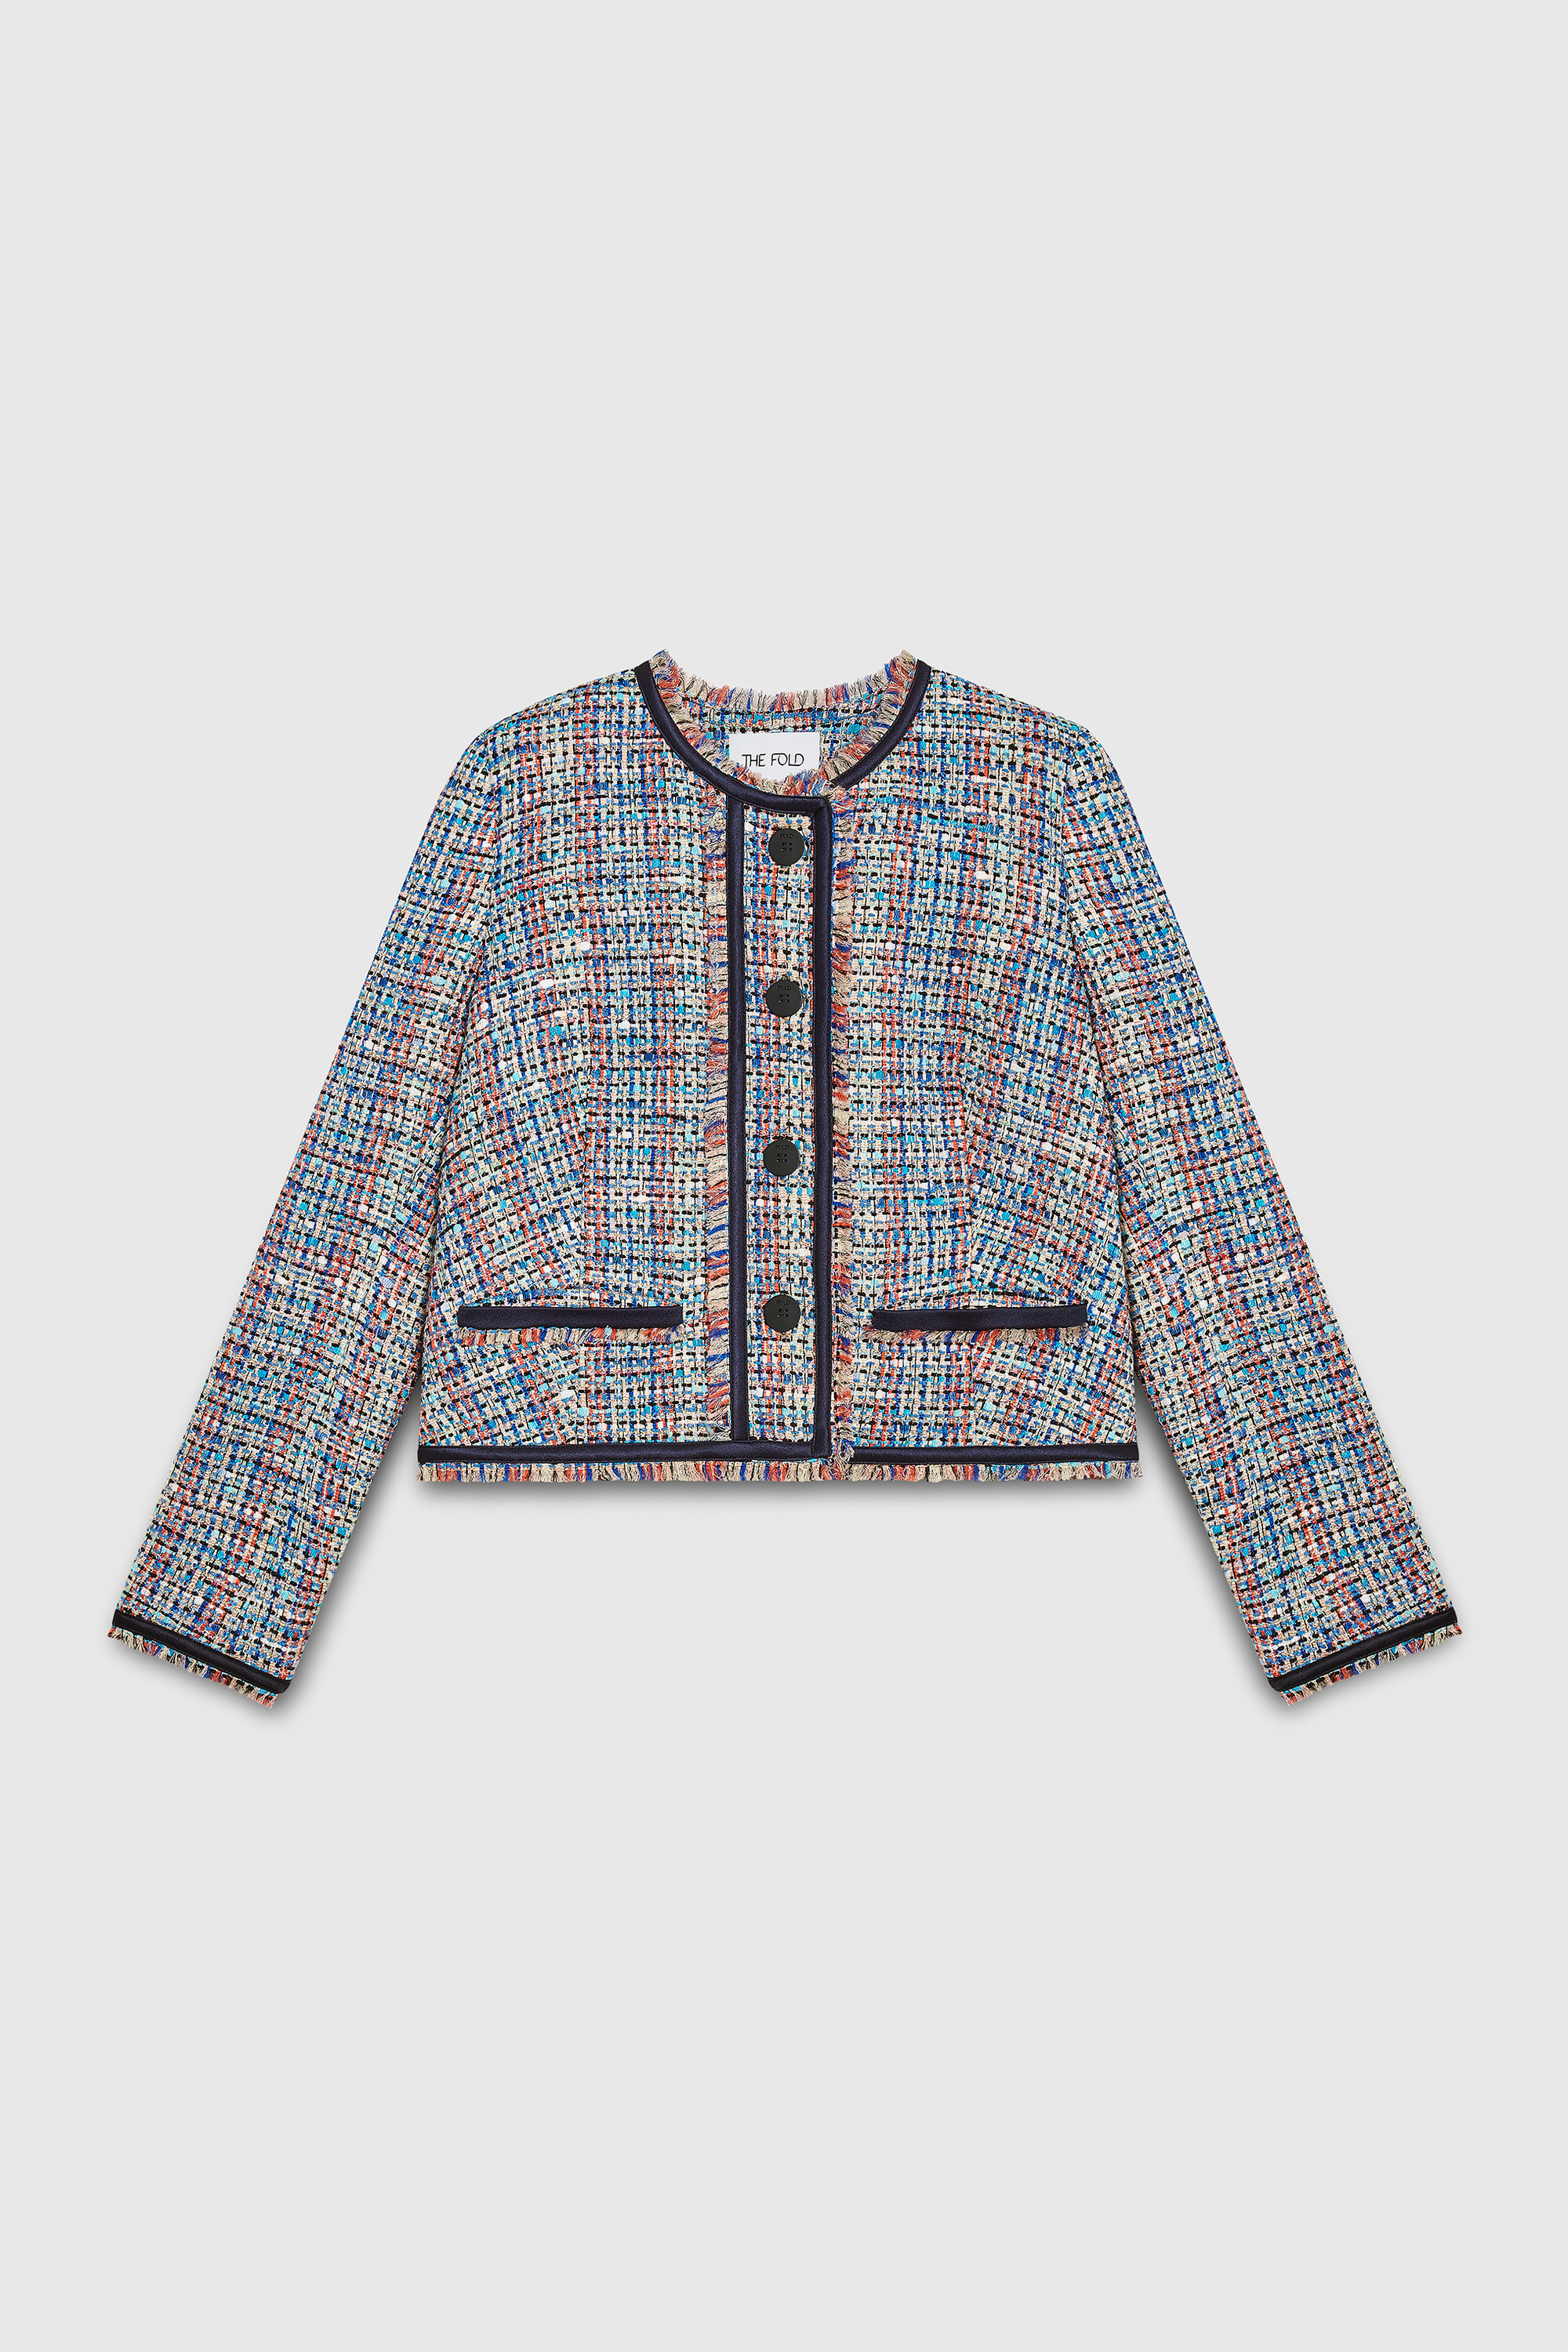 Somerford Jacket Multicolour Tweed - Welcome to the Fold LTD